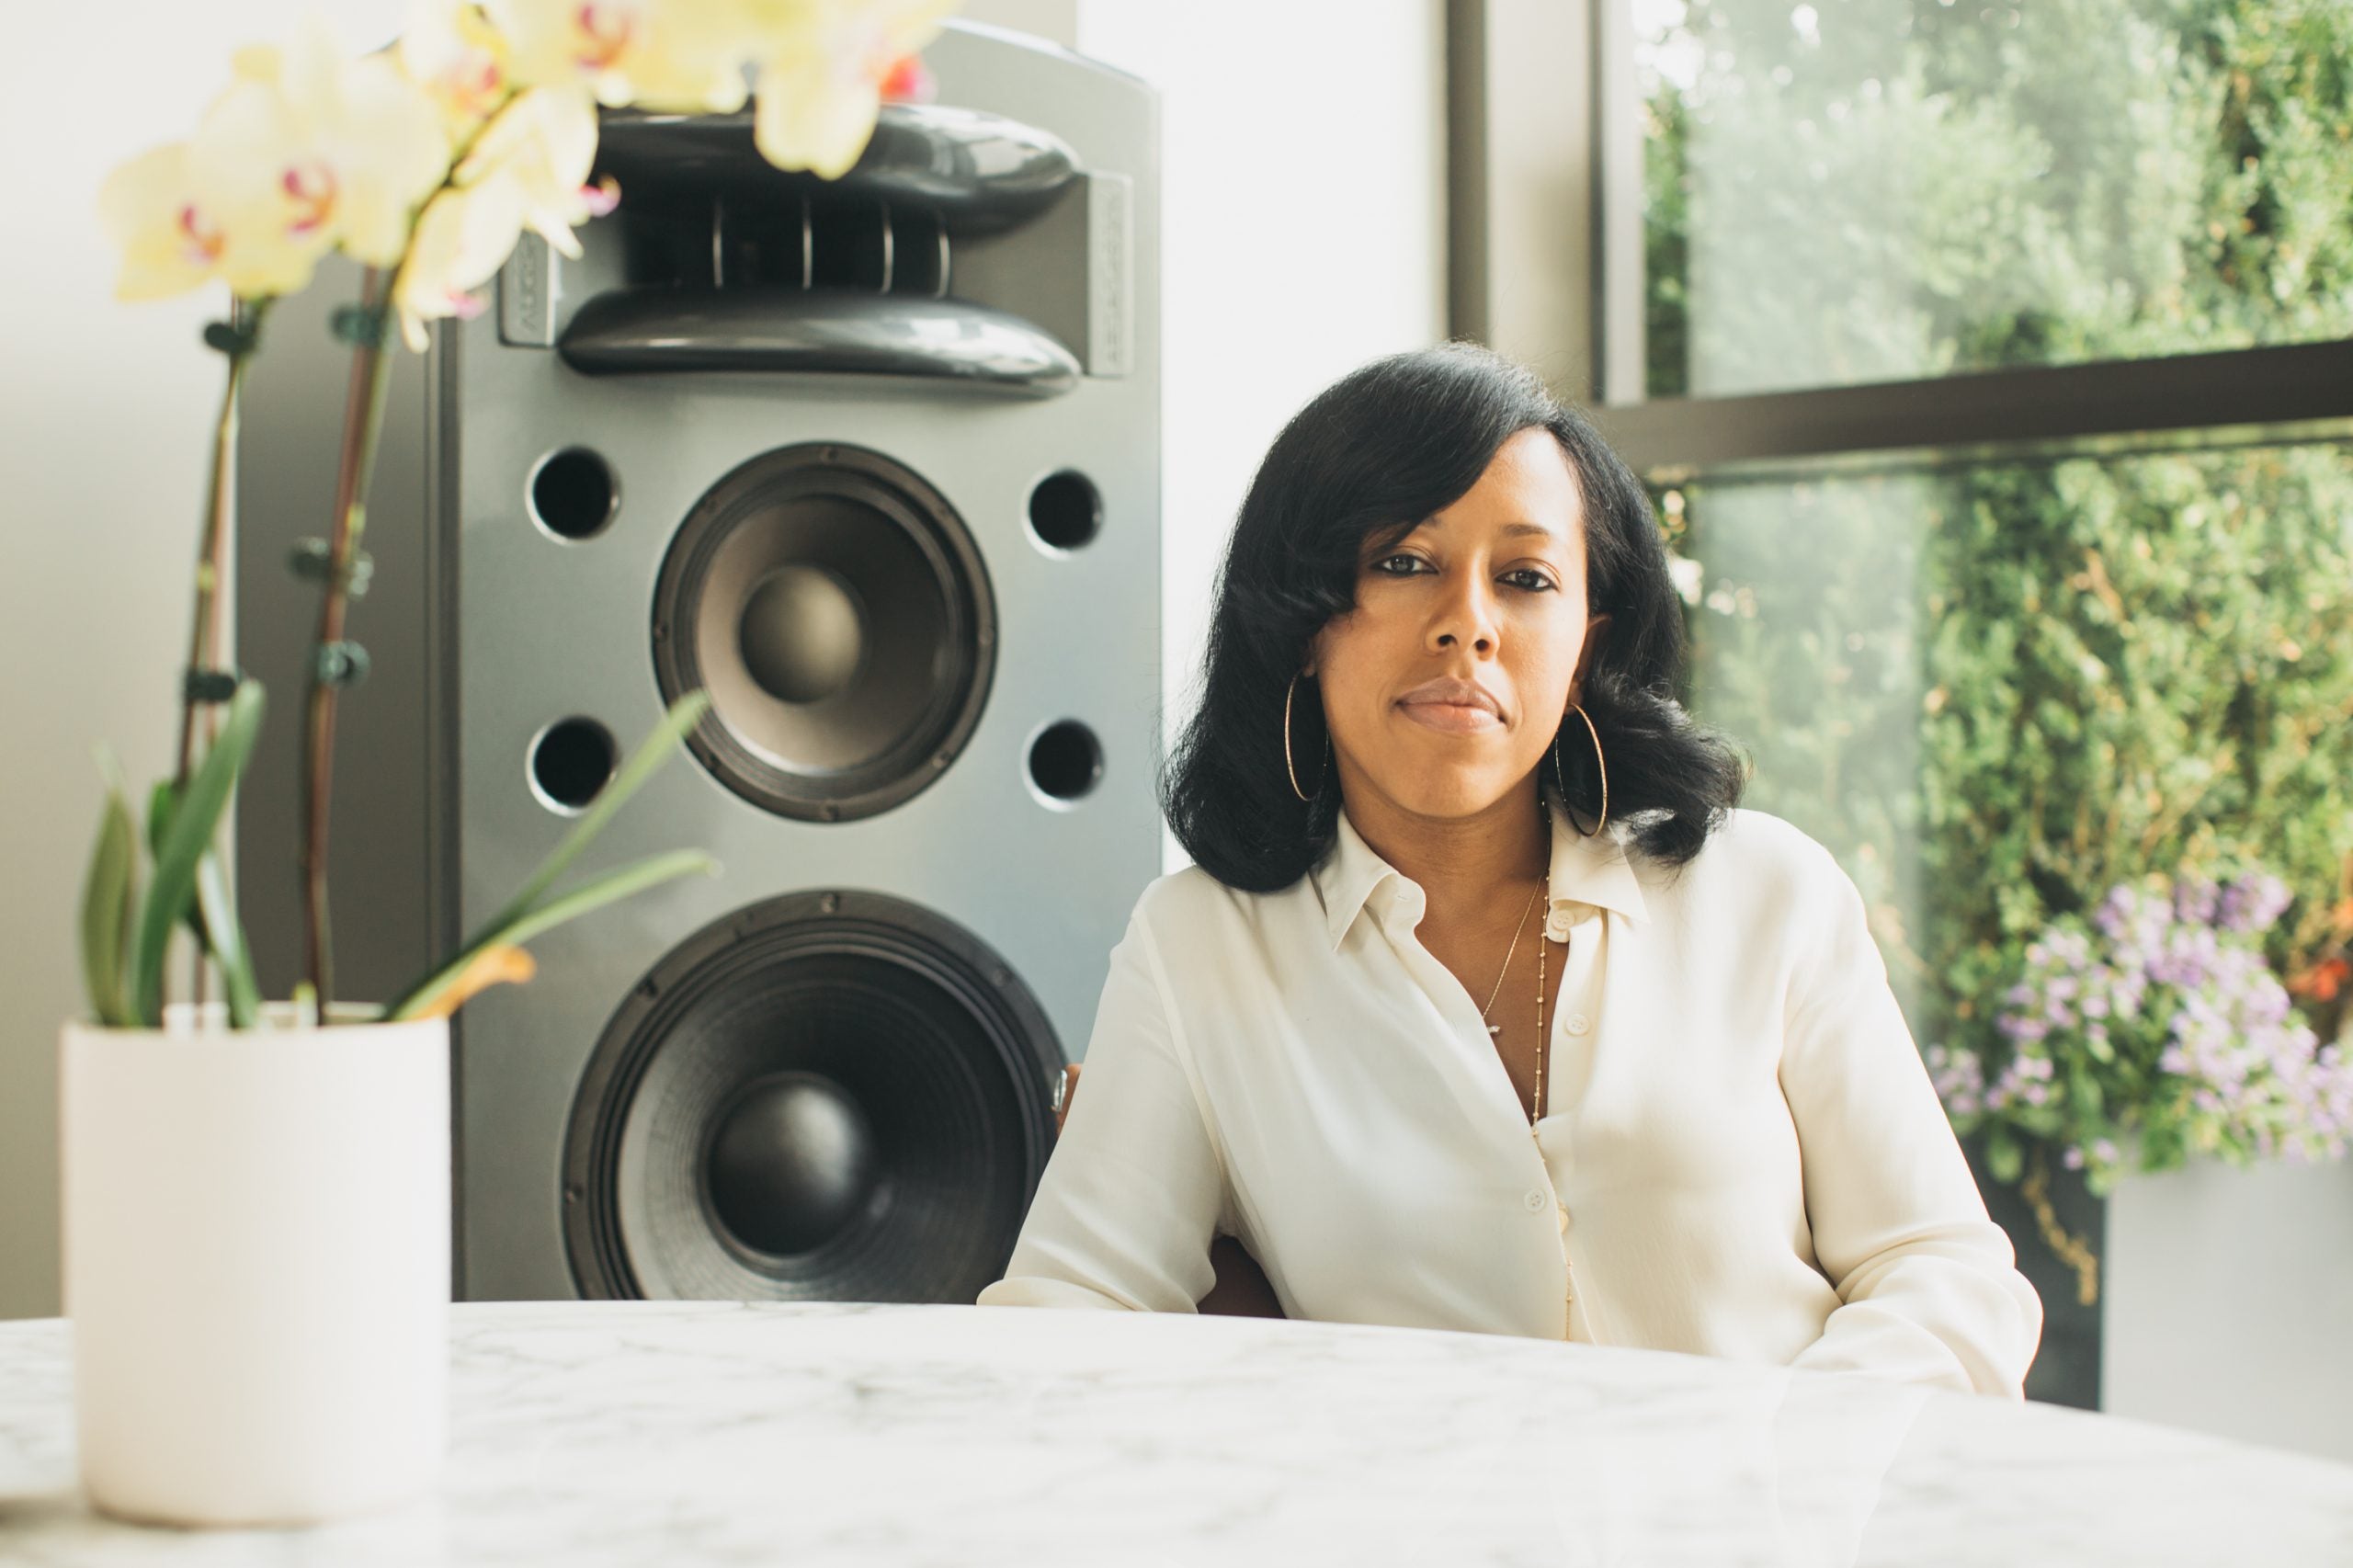 Shari Bryant Went From Roc-A-Fella Intern To Roc Nation Co-President By Choosing To Serve